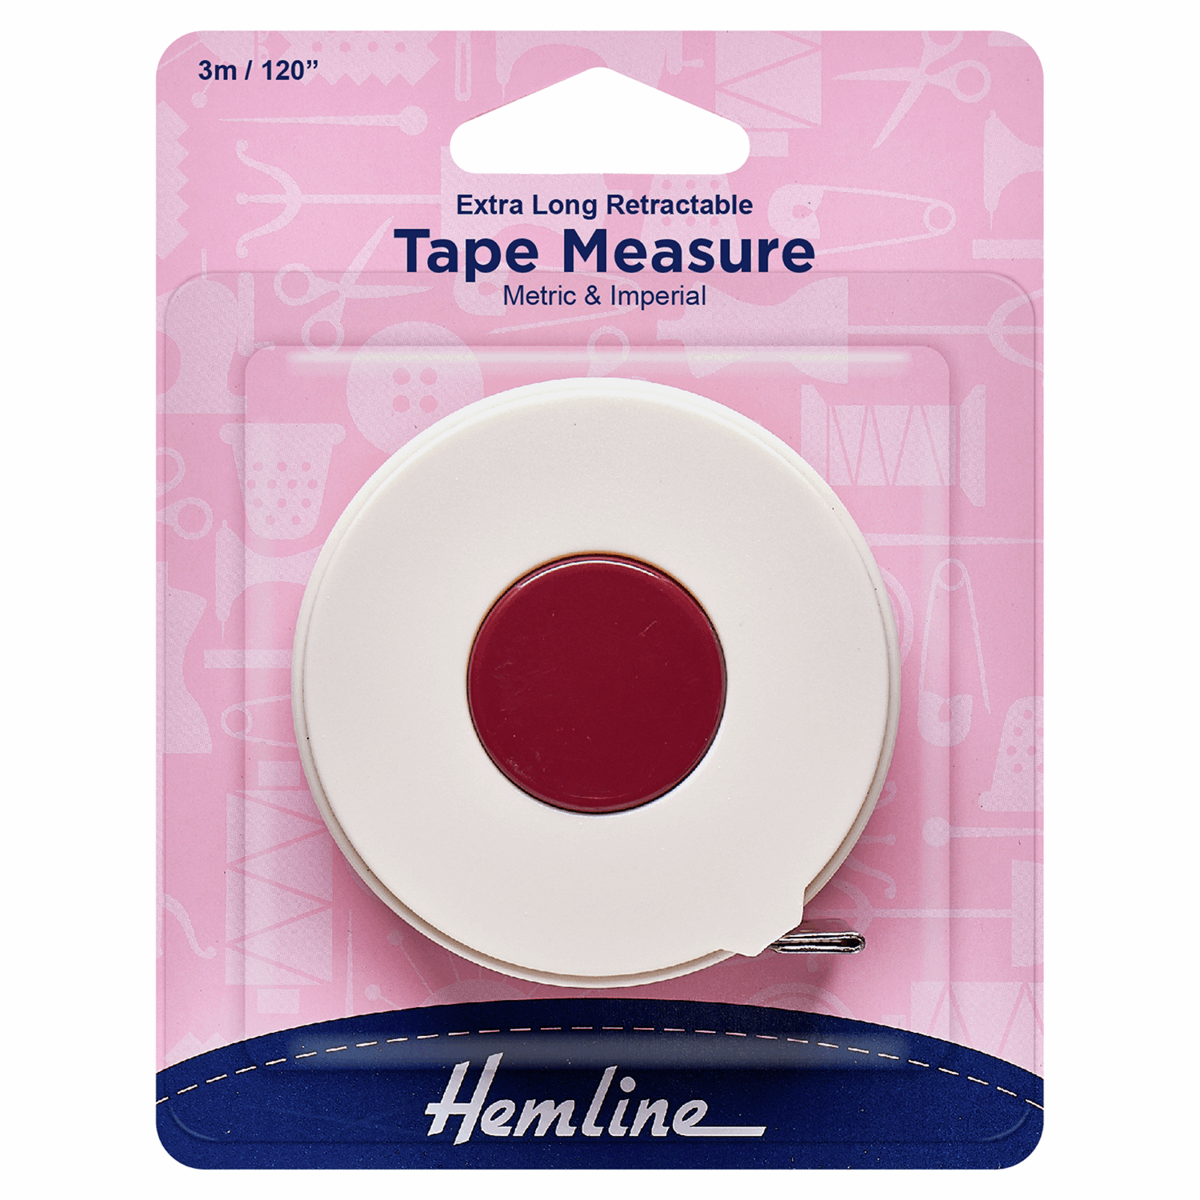 Retractable Tape Measure - Extra Long